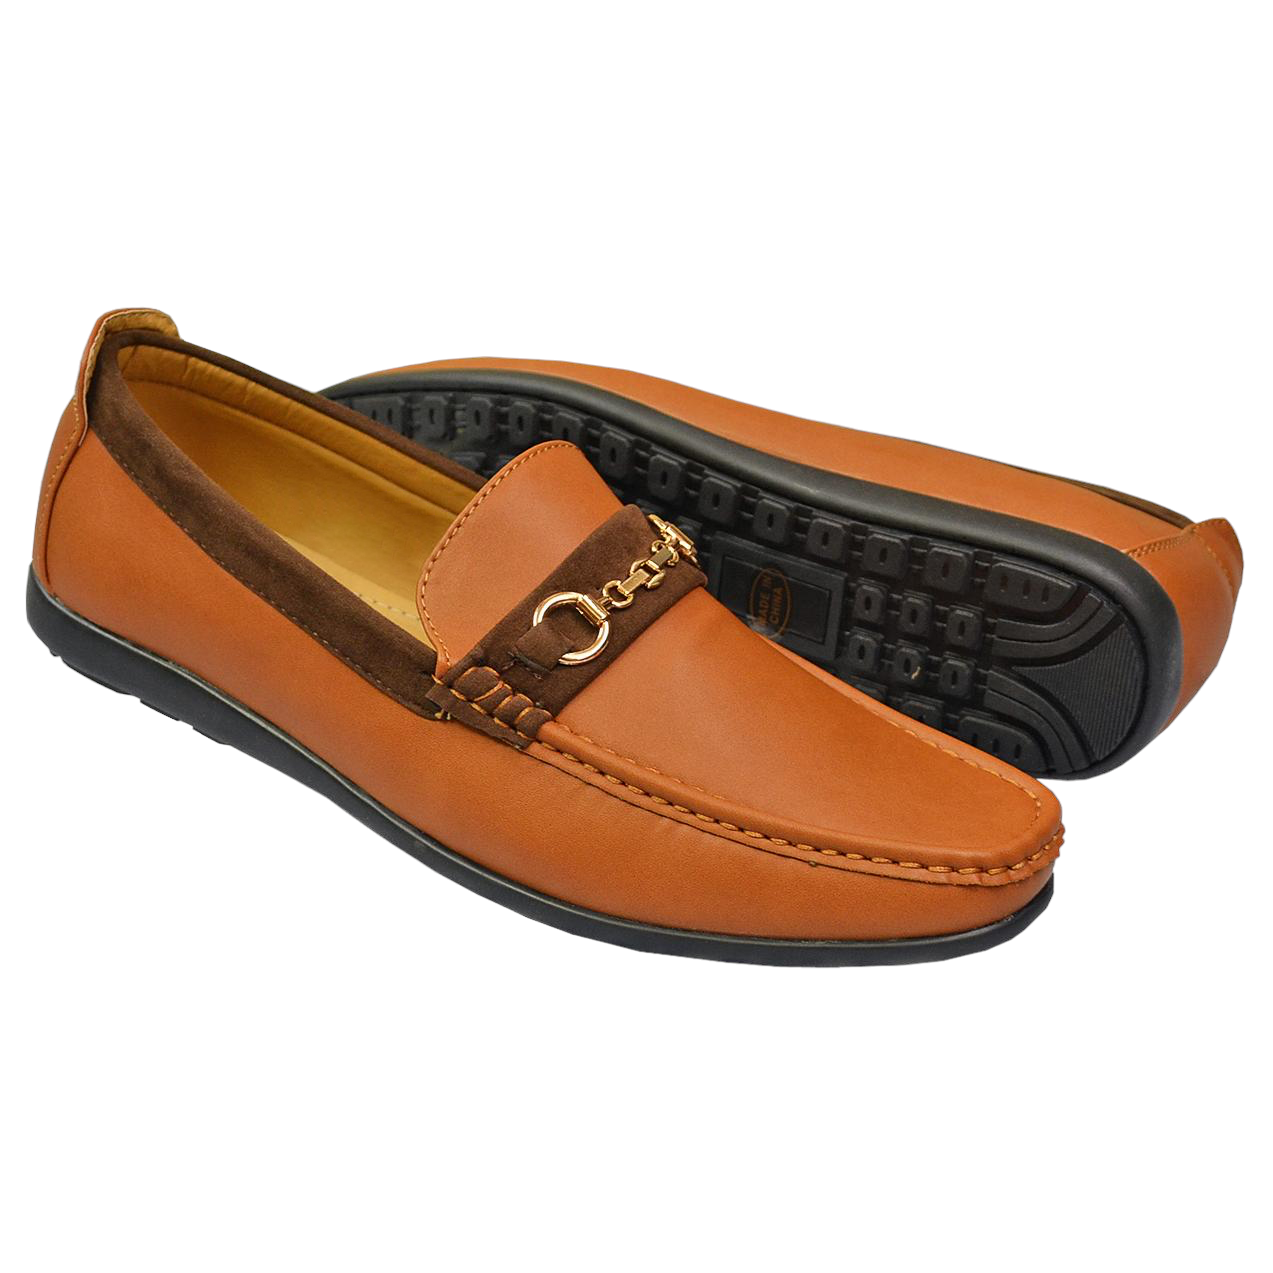 Keith Brown -Tan Loafer's